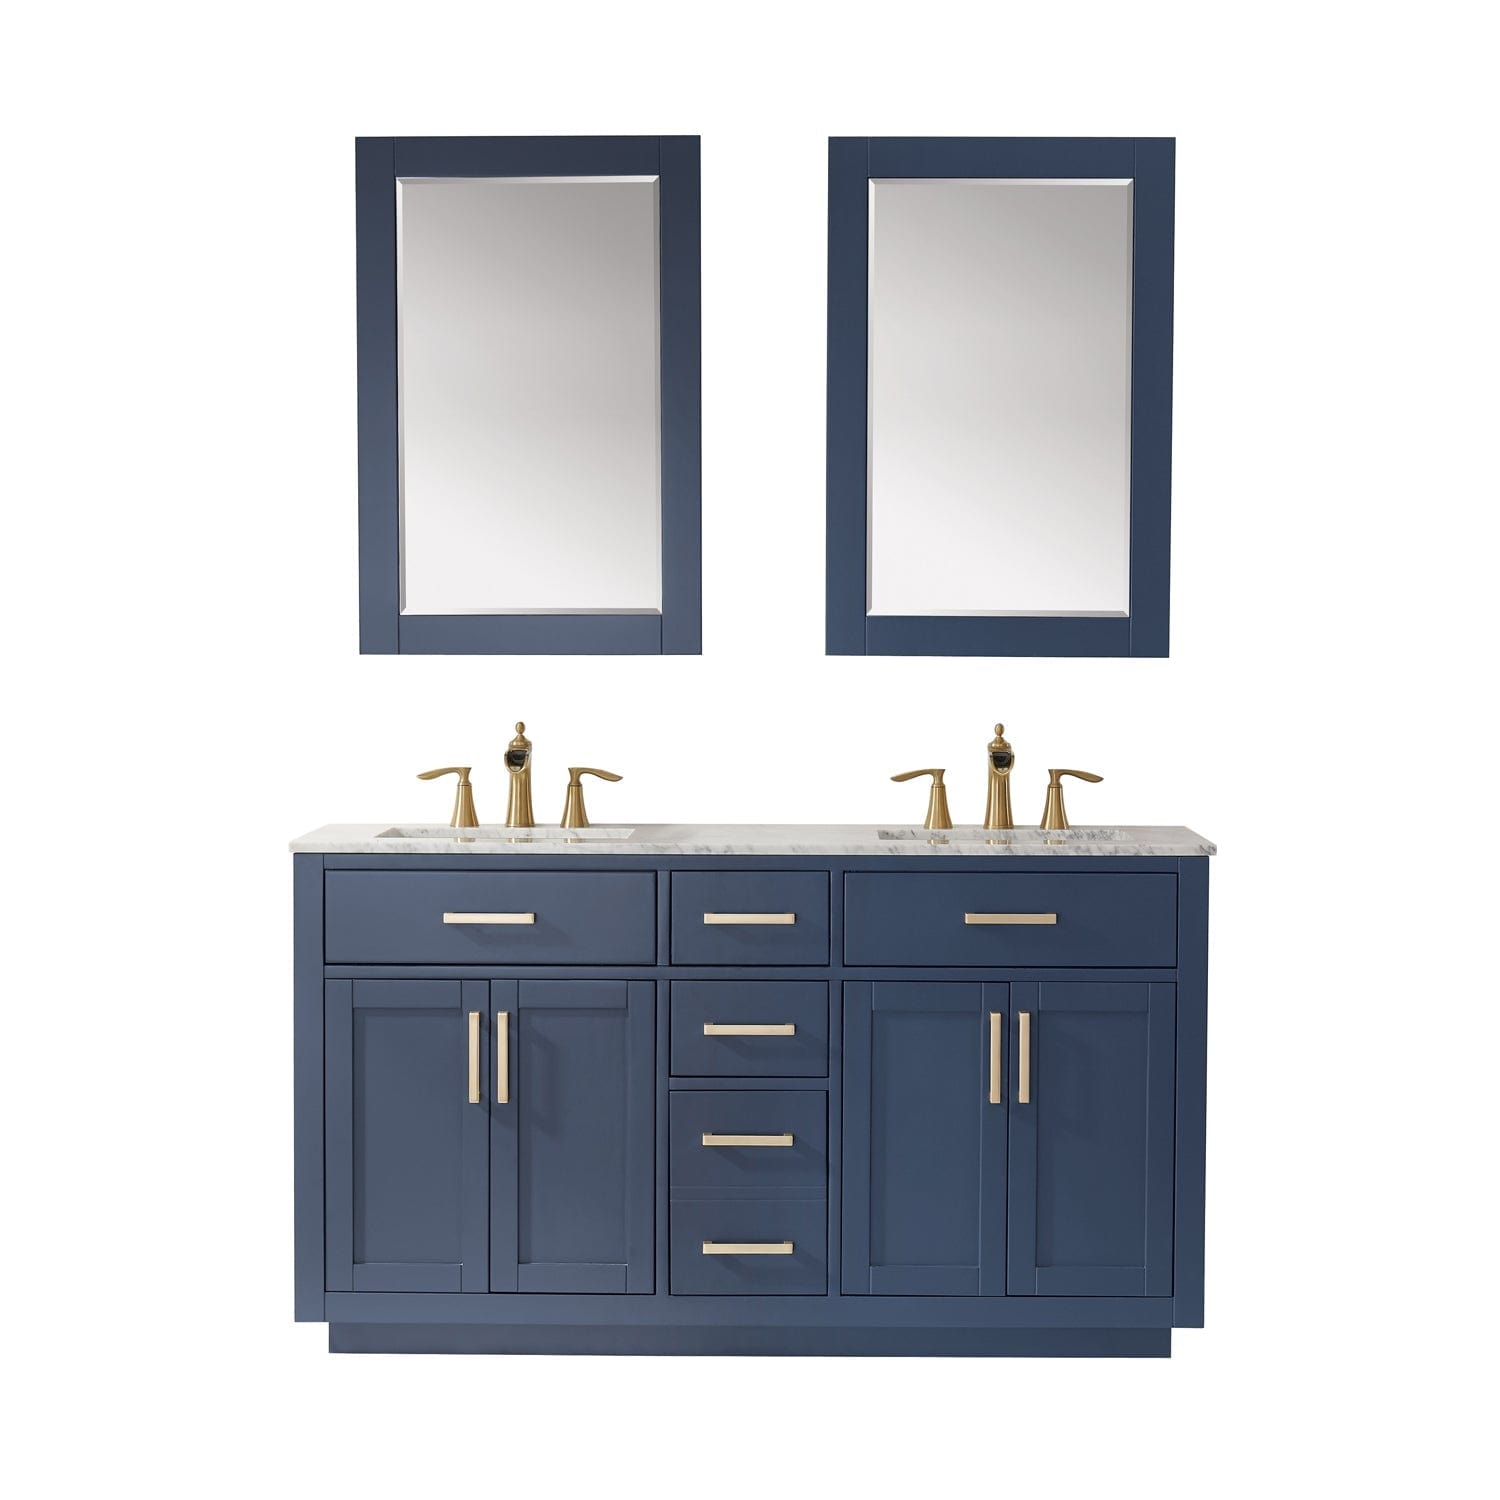 Altair Ivy 60" Double Bathroom Vanity Set in Royal Blue and Carrara White Marble Countertop with Mirror 531060-RB-CA - Molaix631112971232Vanity531060-RB-CA